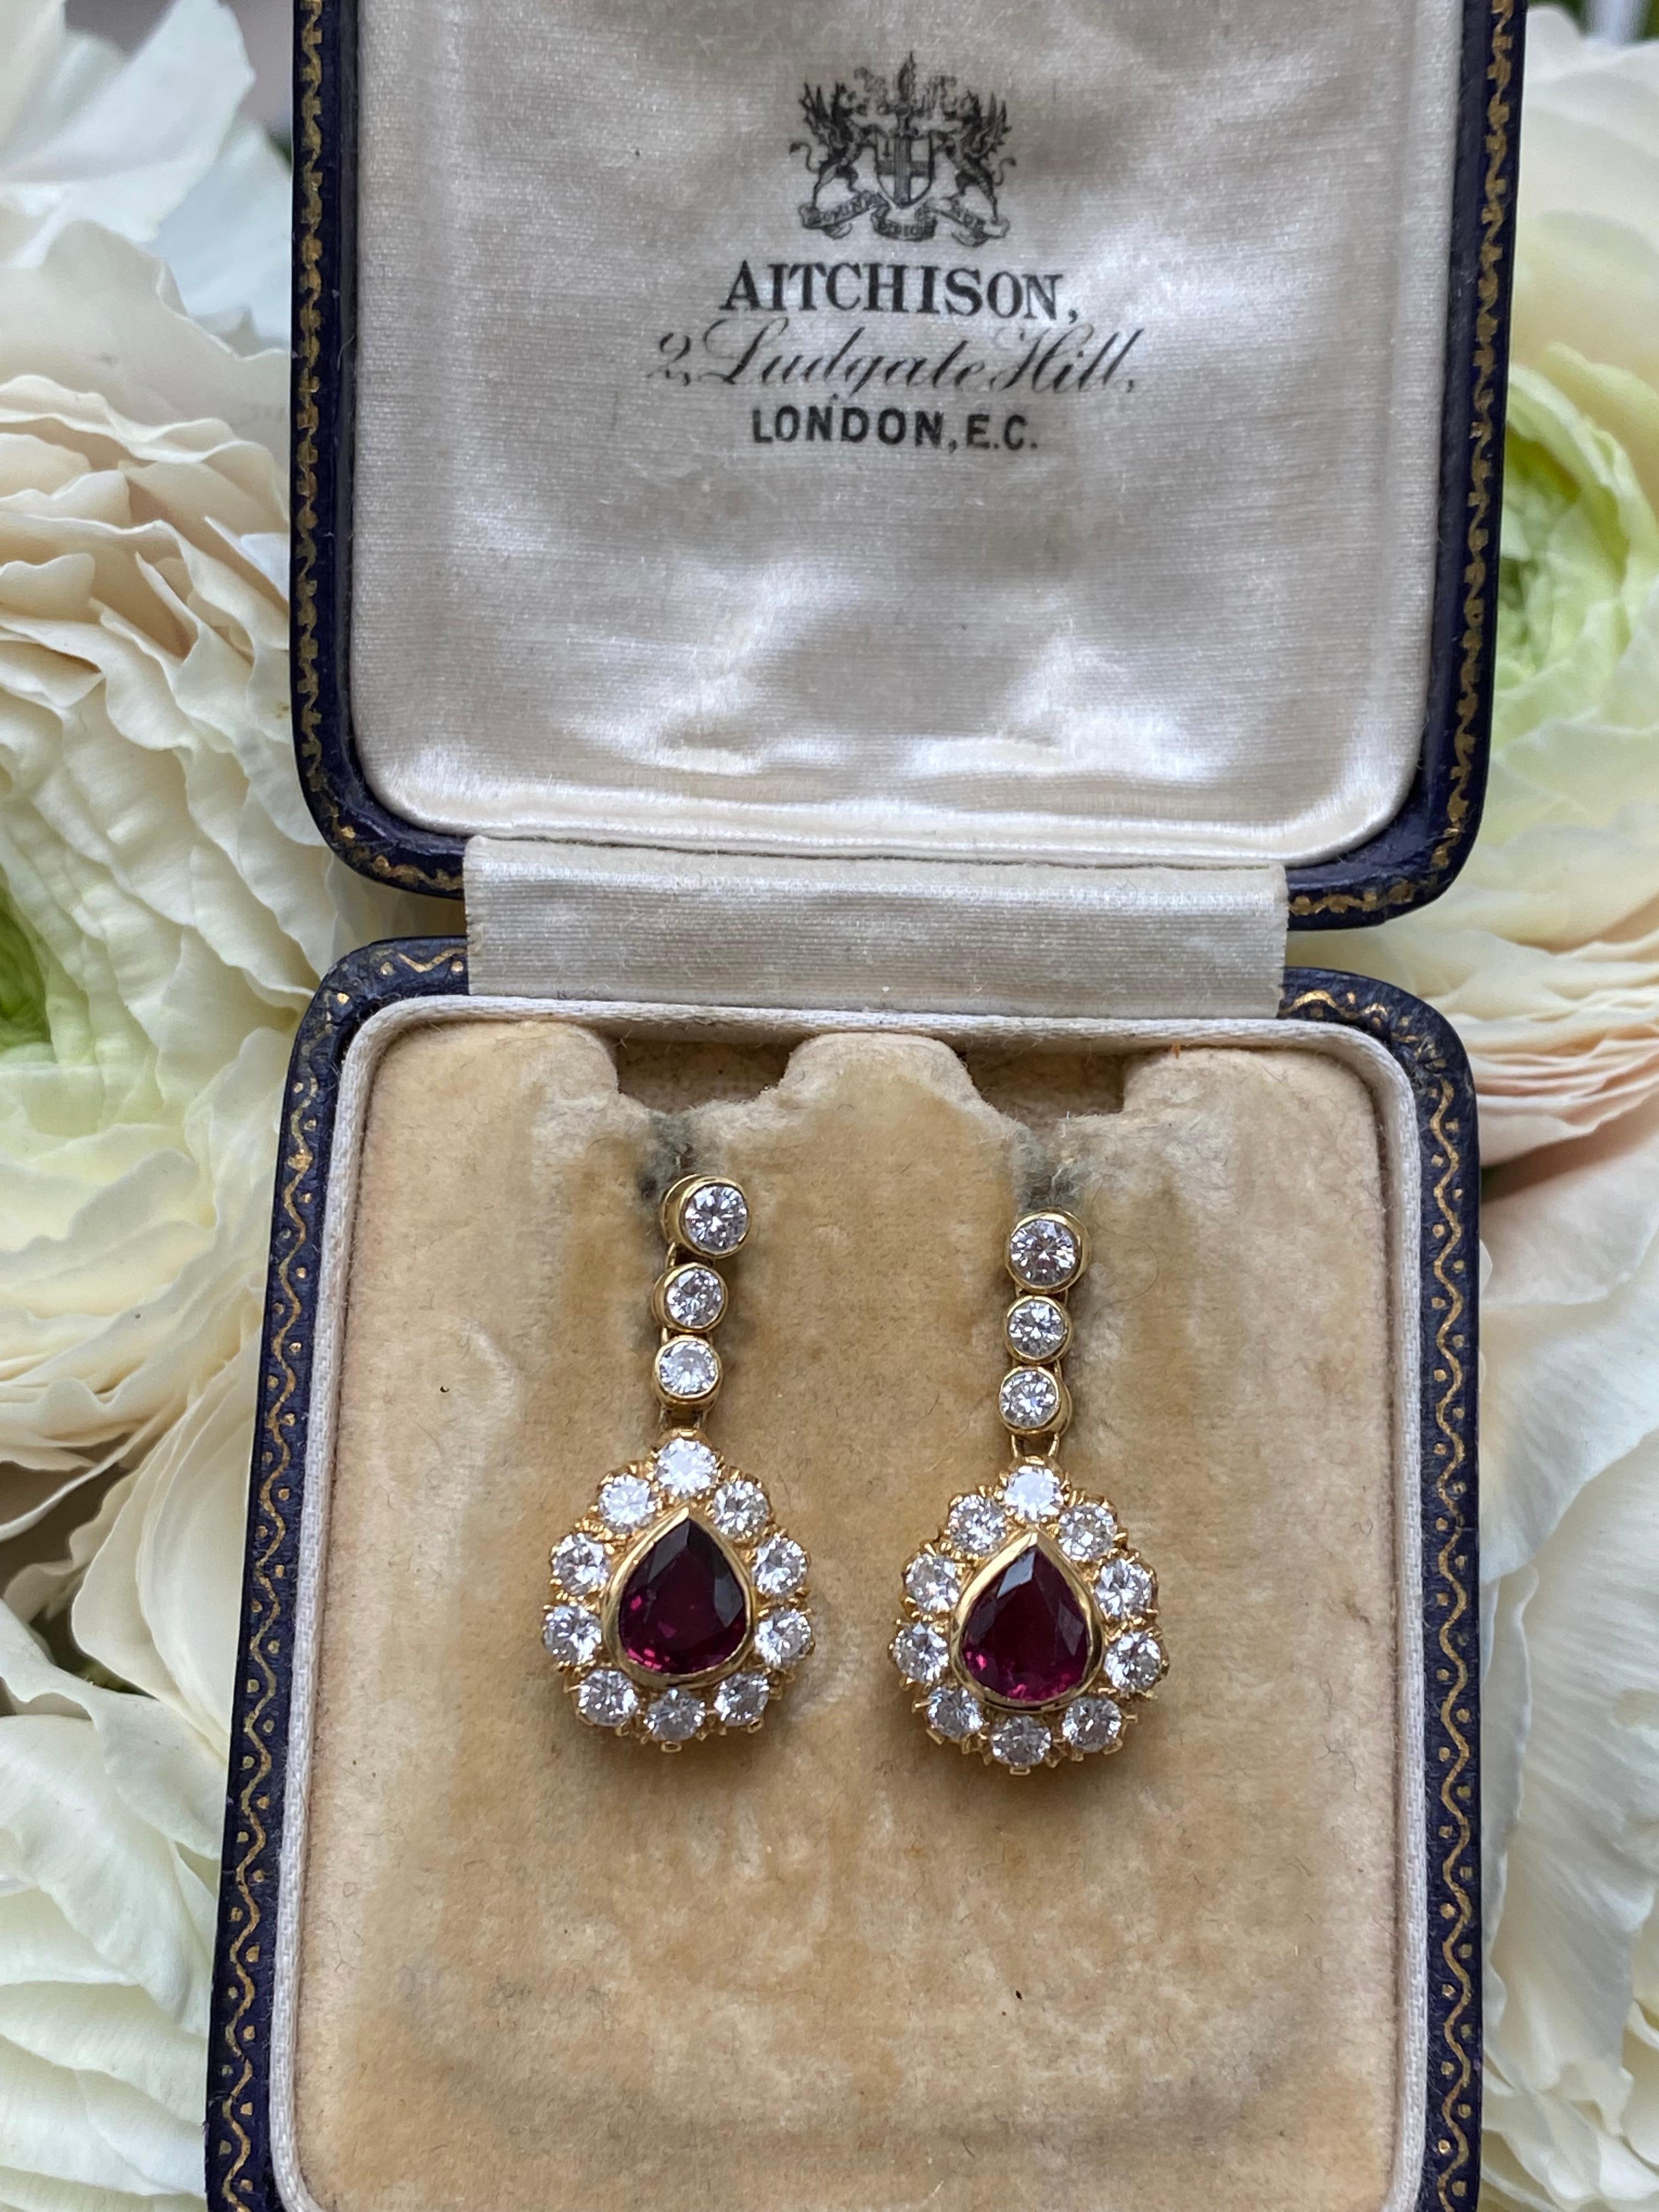 Vintage Teardrop Ruby and Diamond Earrings. Certified 1.7cts of rubies and 1.5cts of brilliant cut diamonds (G/H SI) All set in 18ct gold, they measure 25x12mm.